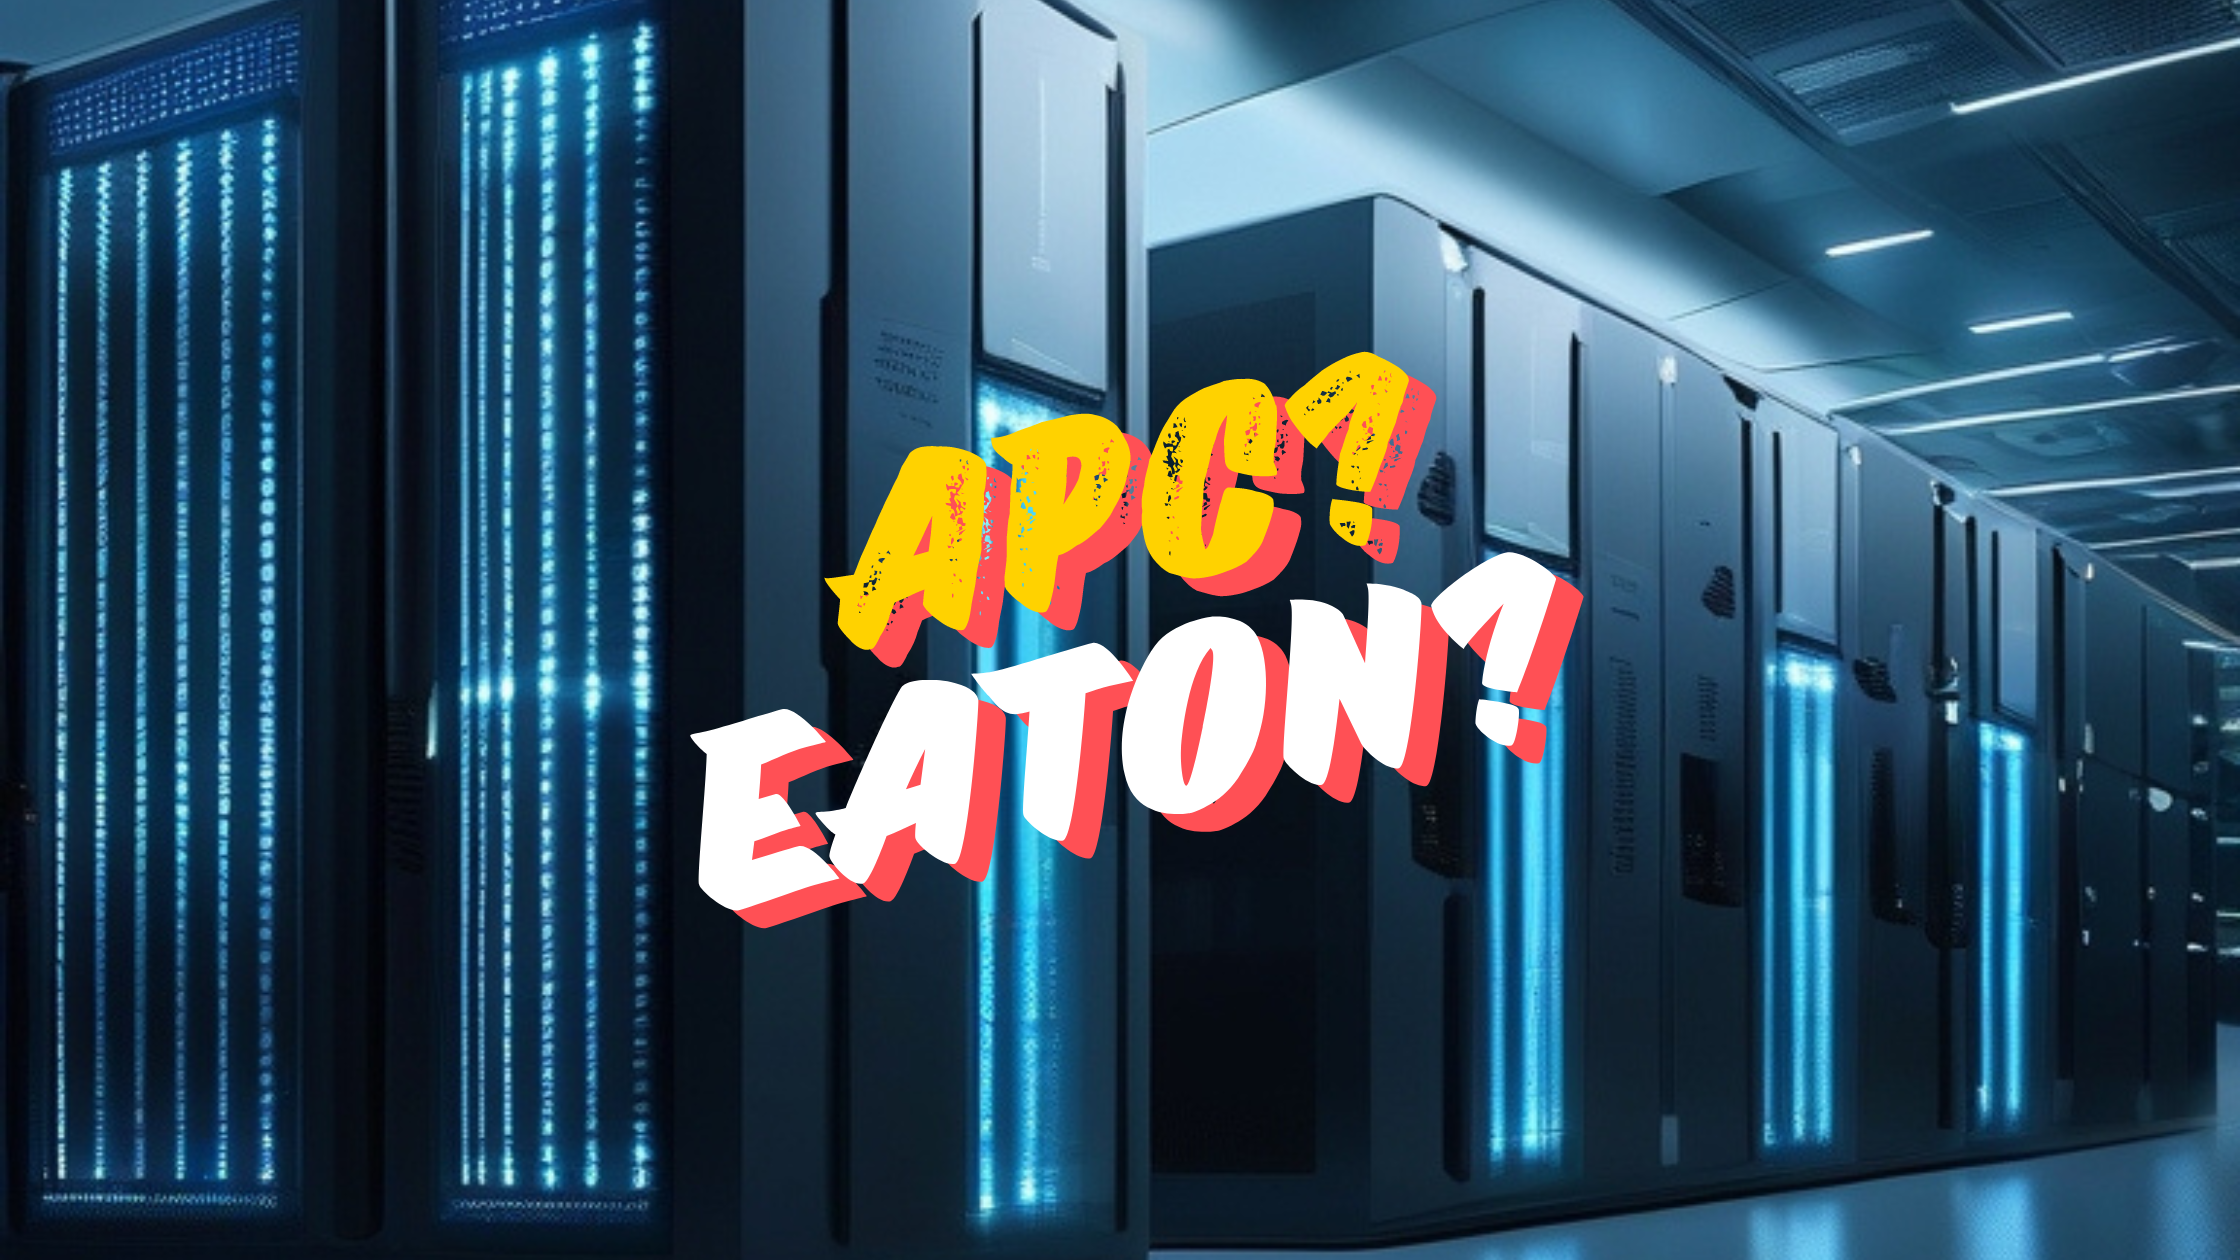 APC vs Eaton: Which Power Management Solution is Right for You?